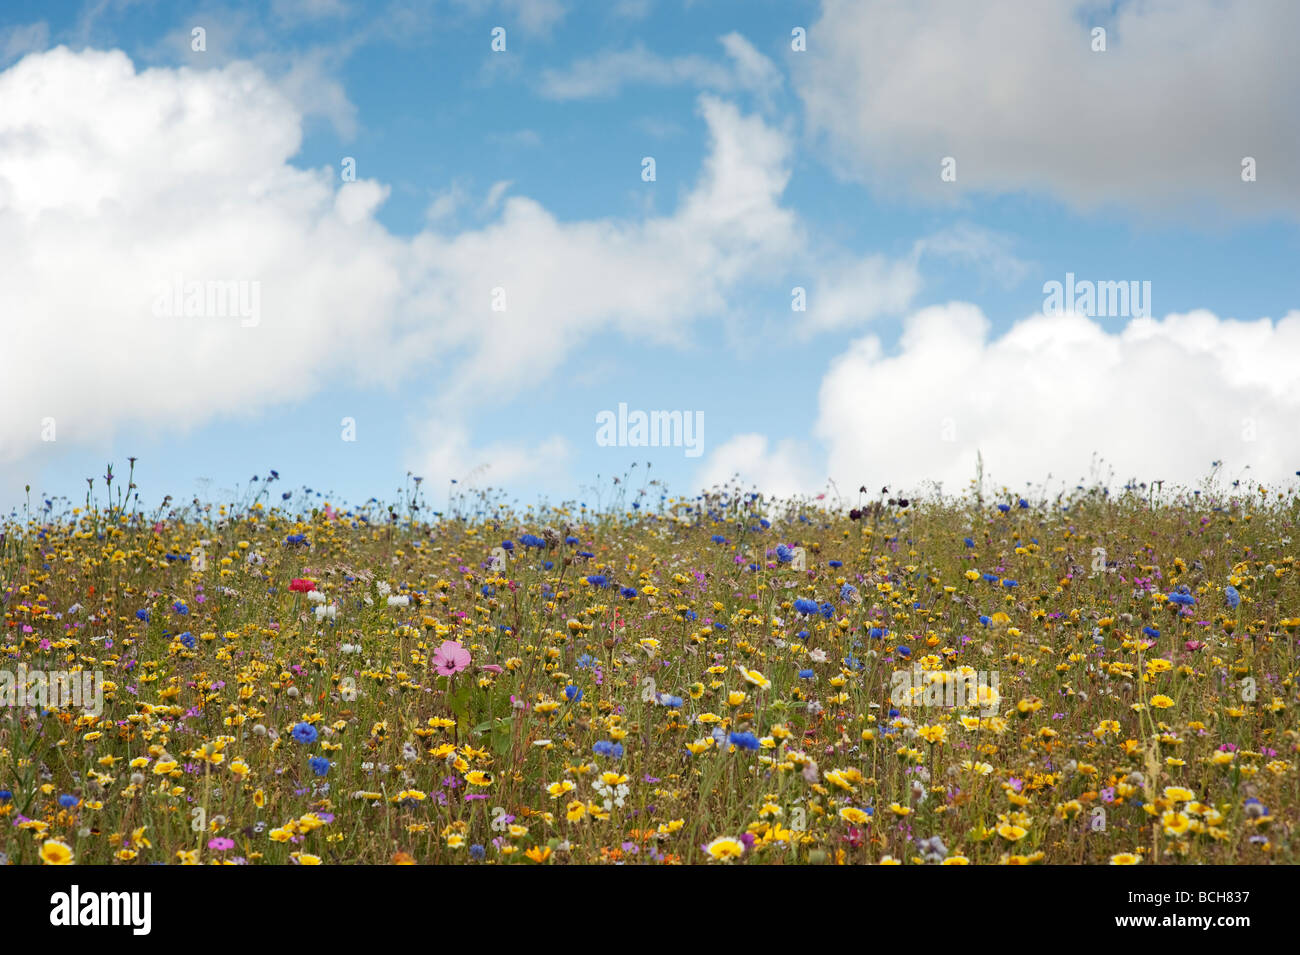 Wildflowers in the english countryside. England Stock Photo